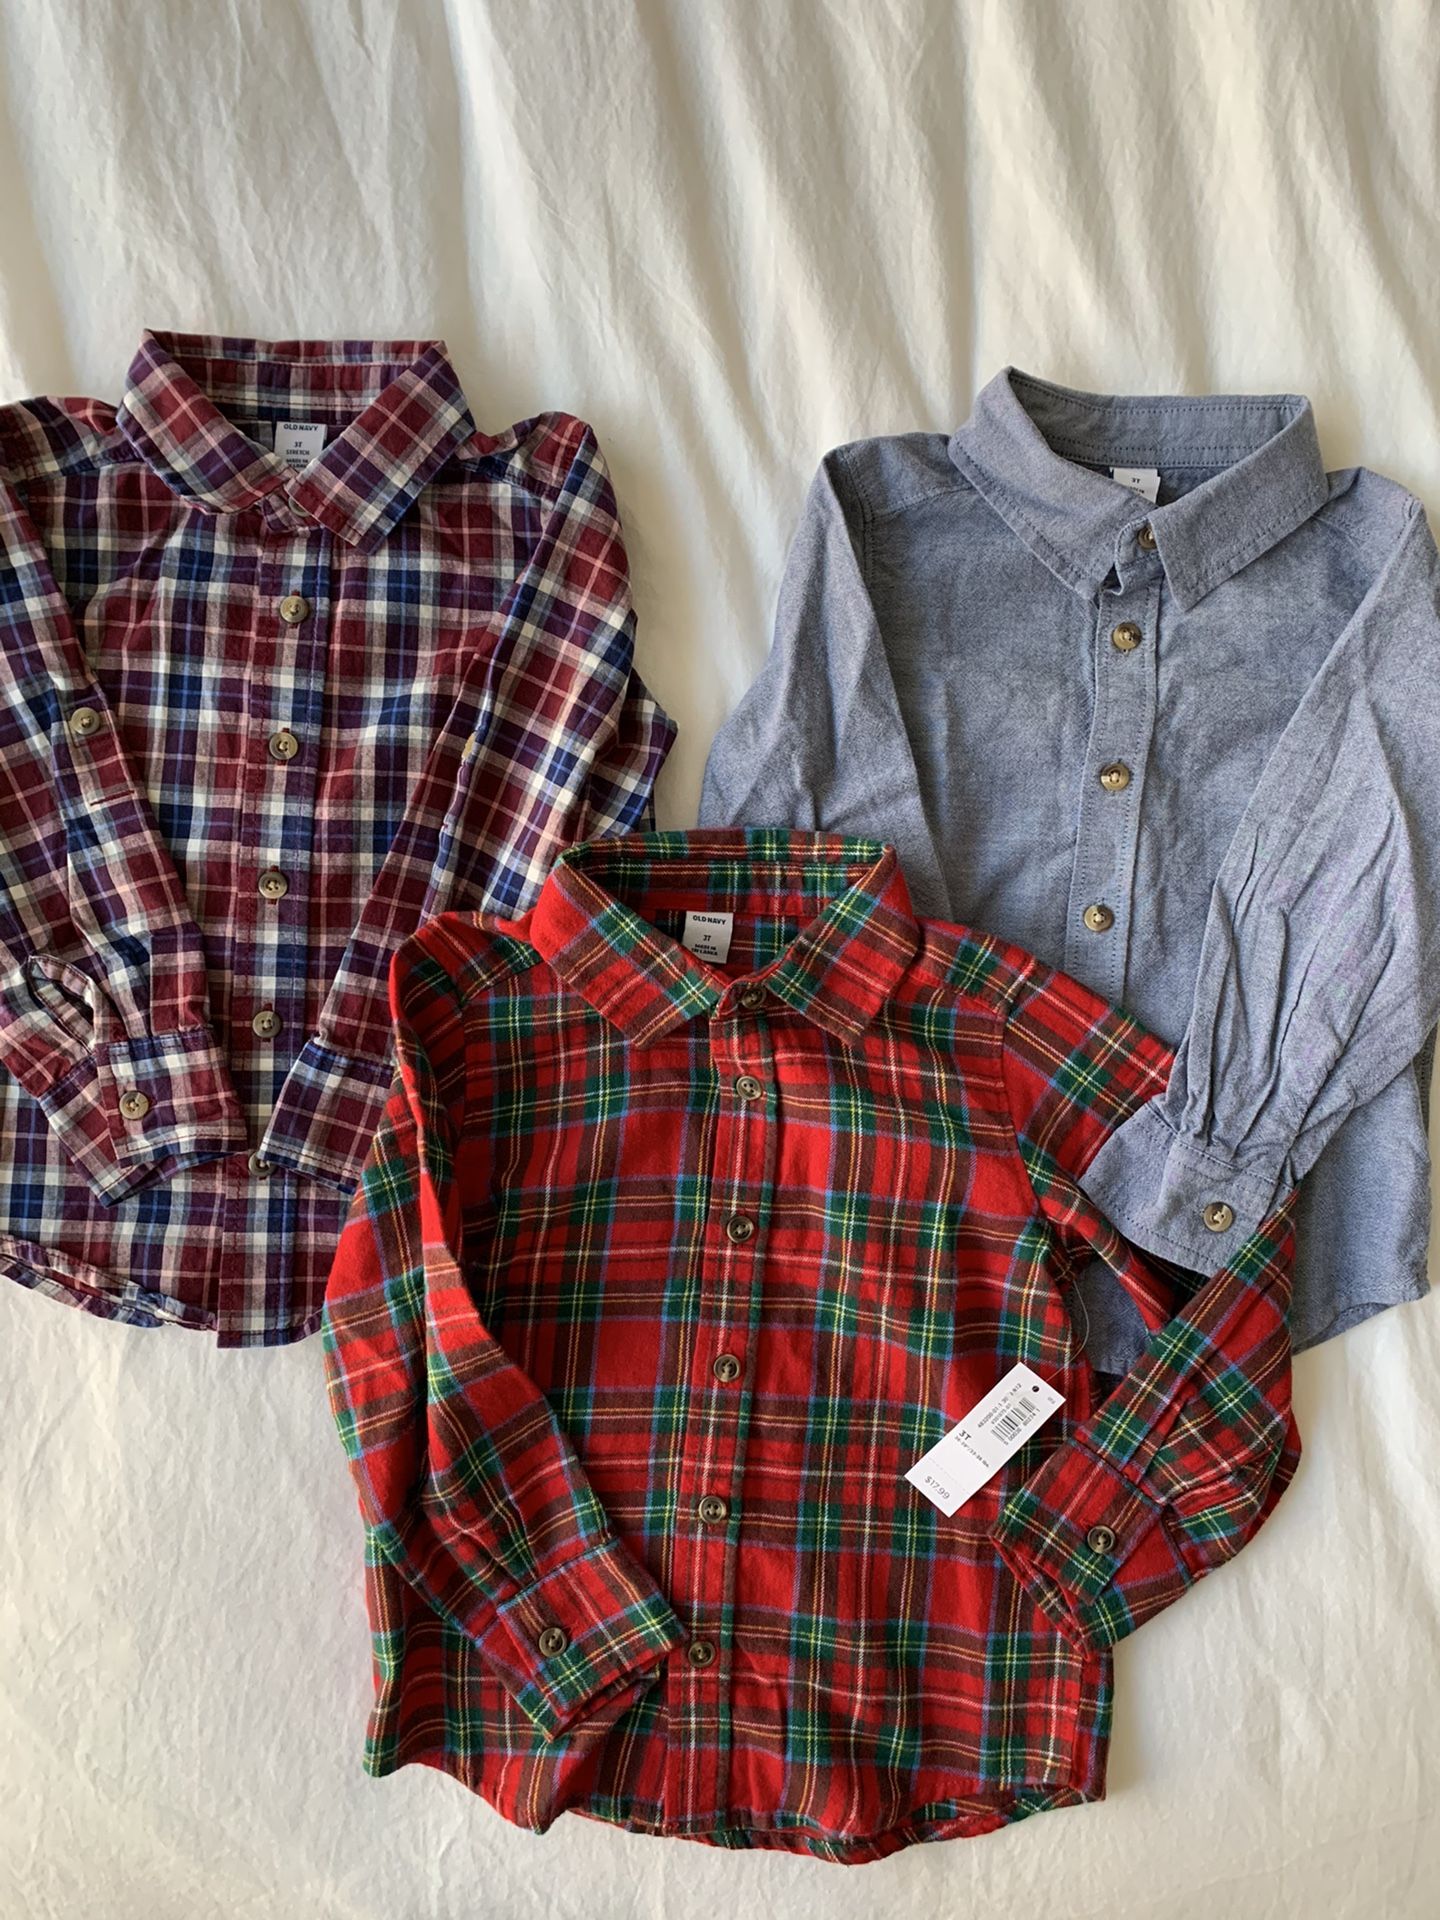 3T Button-Down Collared Dress Shirts